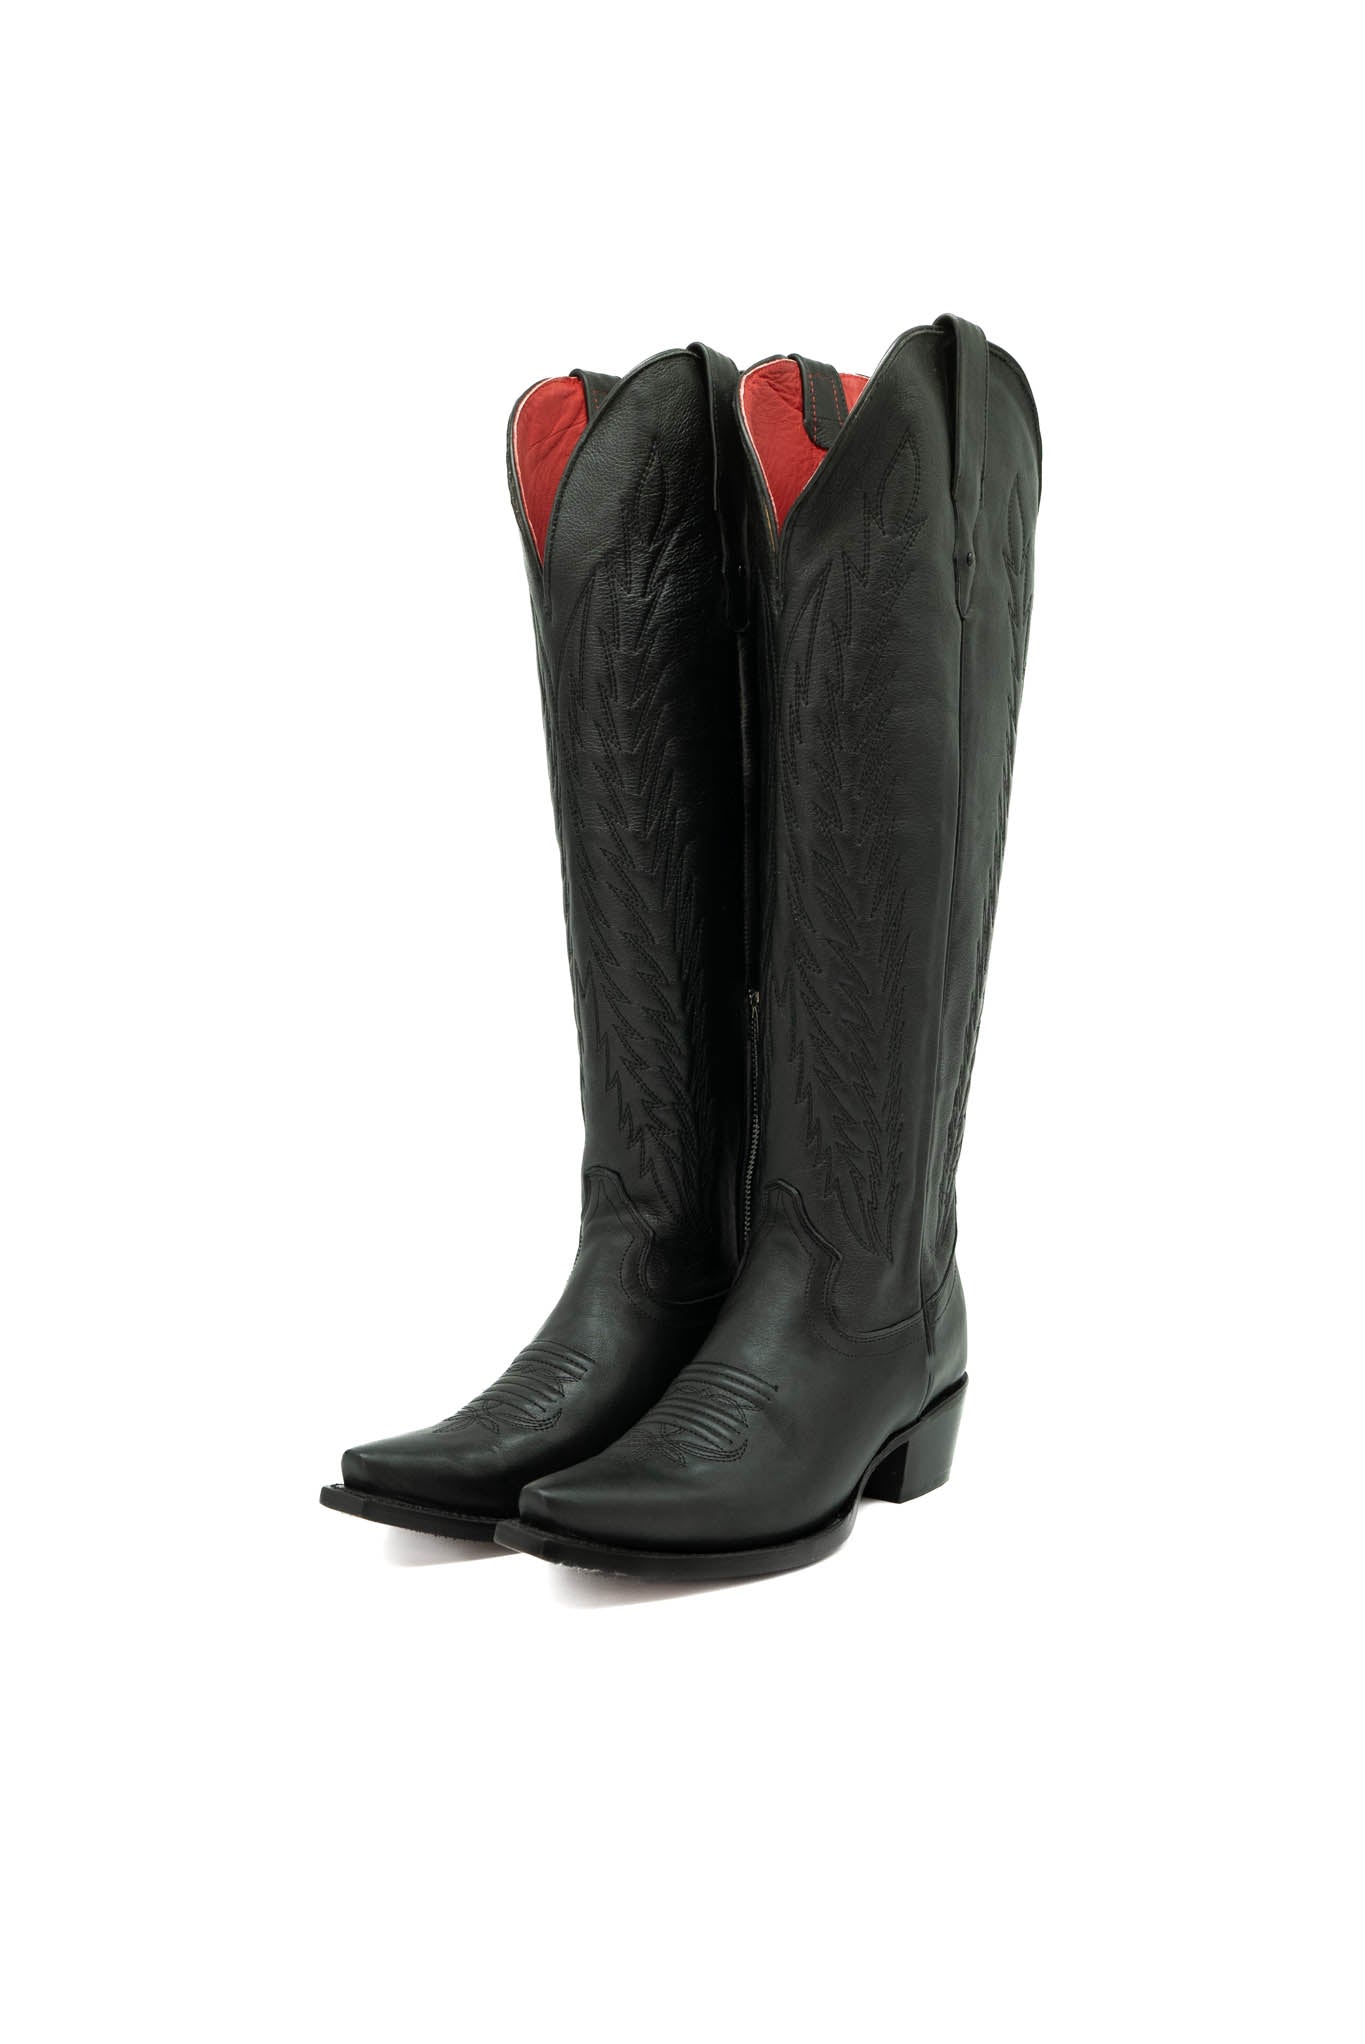 red bottom boots louis vuitton cowgirl｜TikTok Search